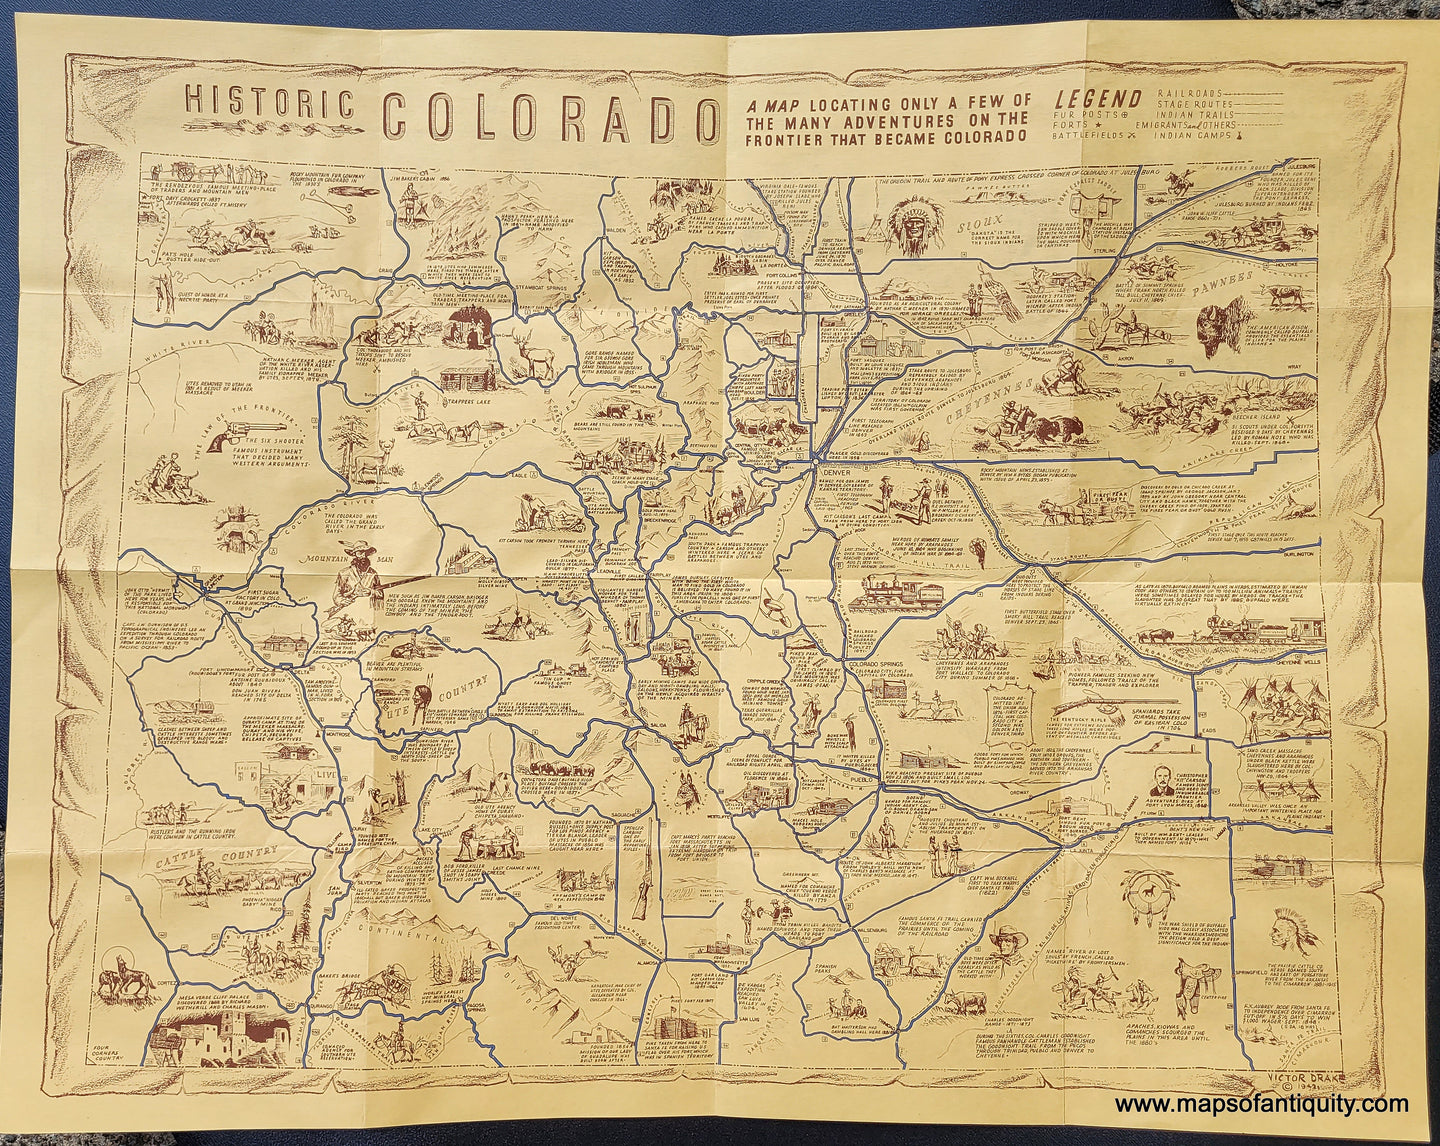 Genuine-Antique-Map-Historic-Colorado-1942-Victor-Drake-Maps-Of-Antiquity